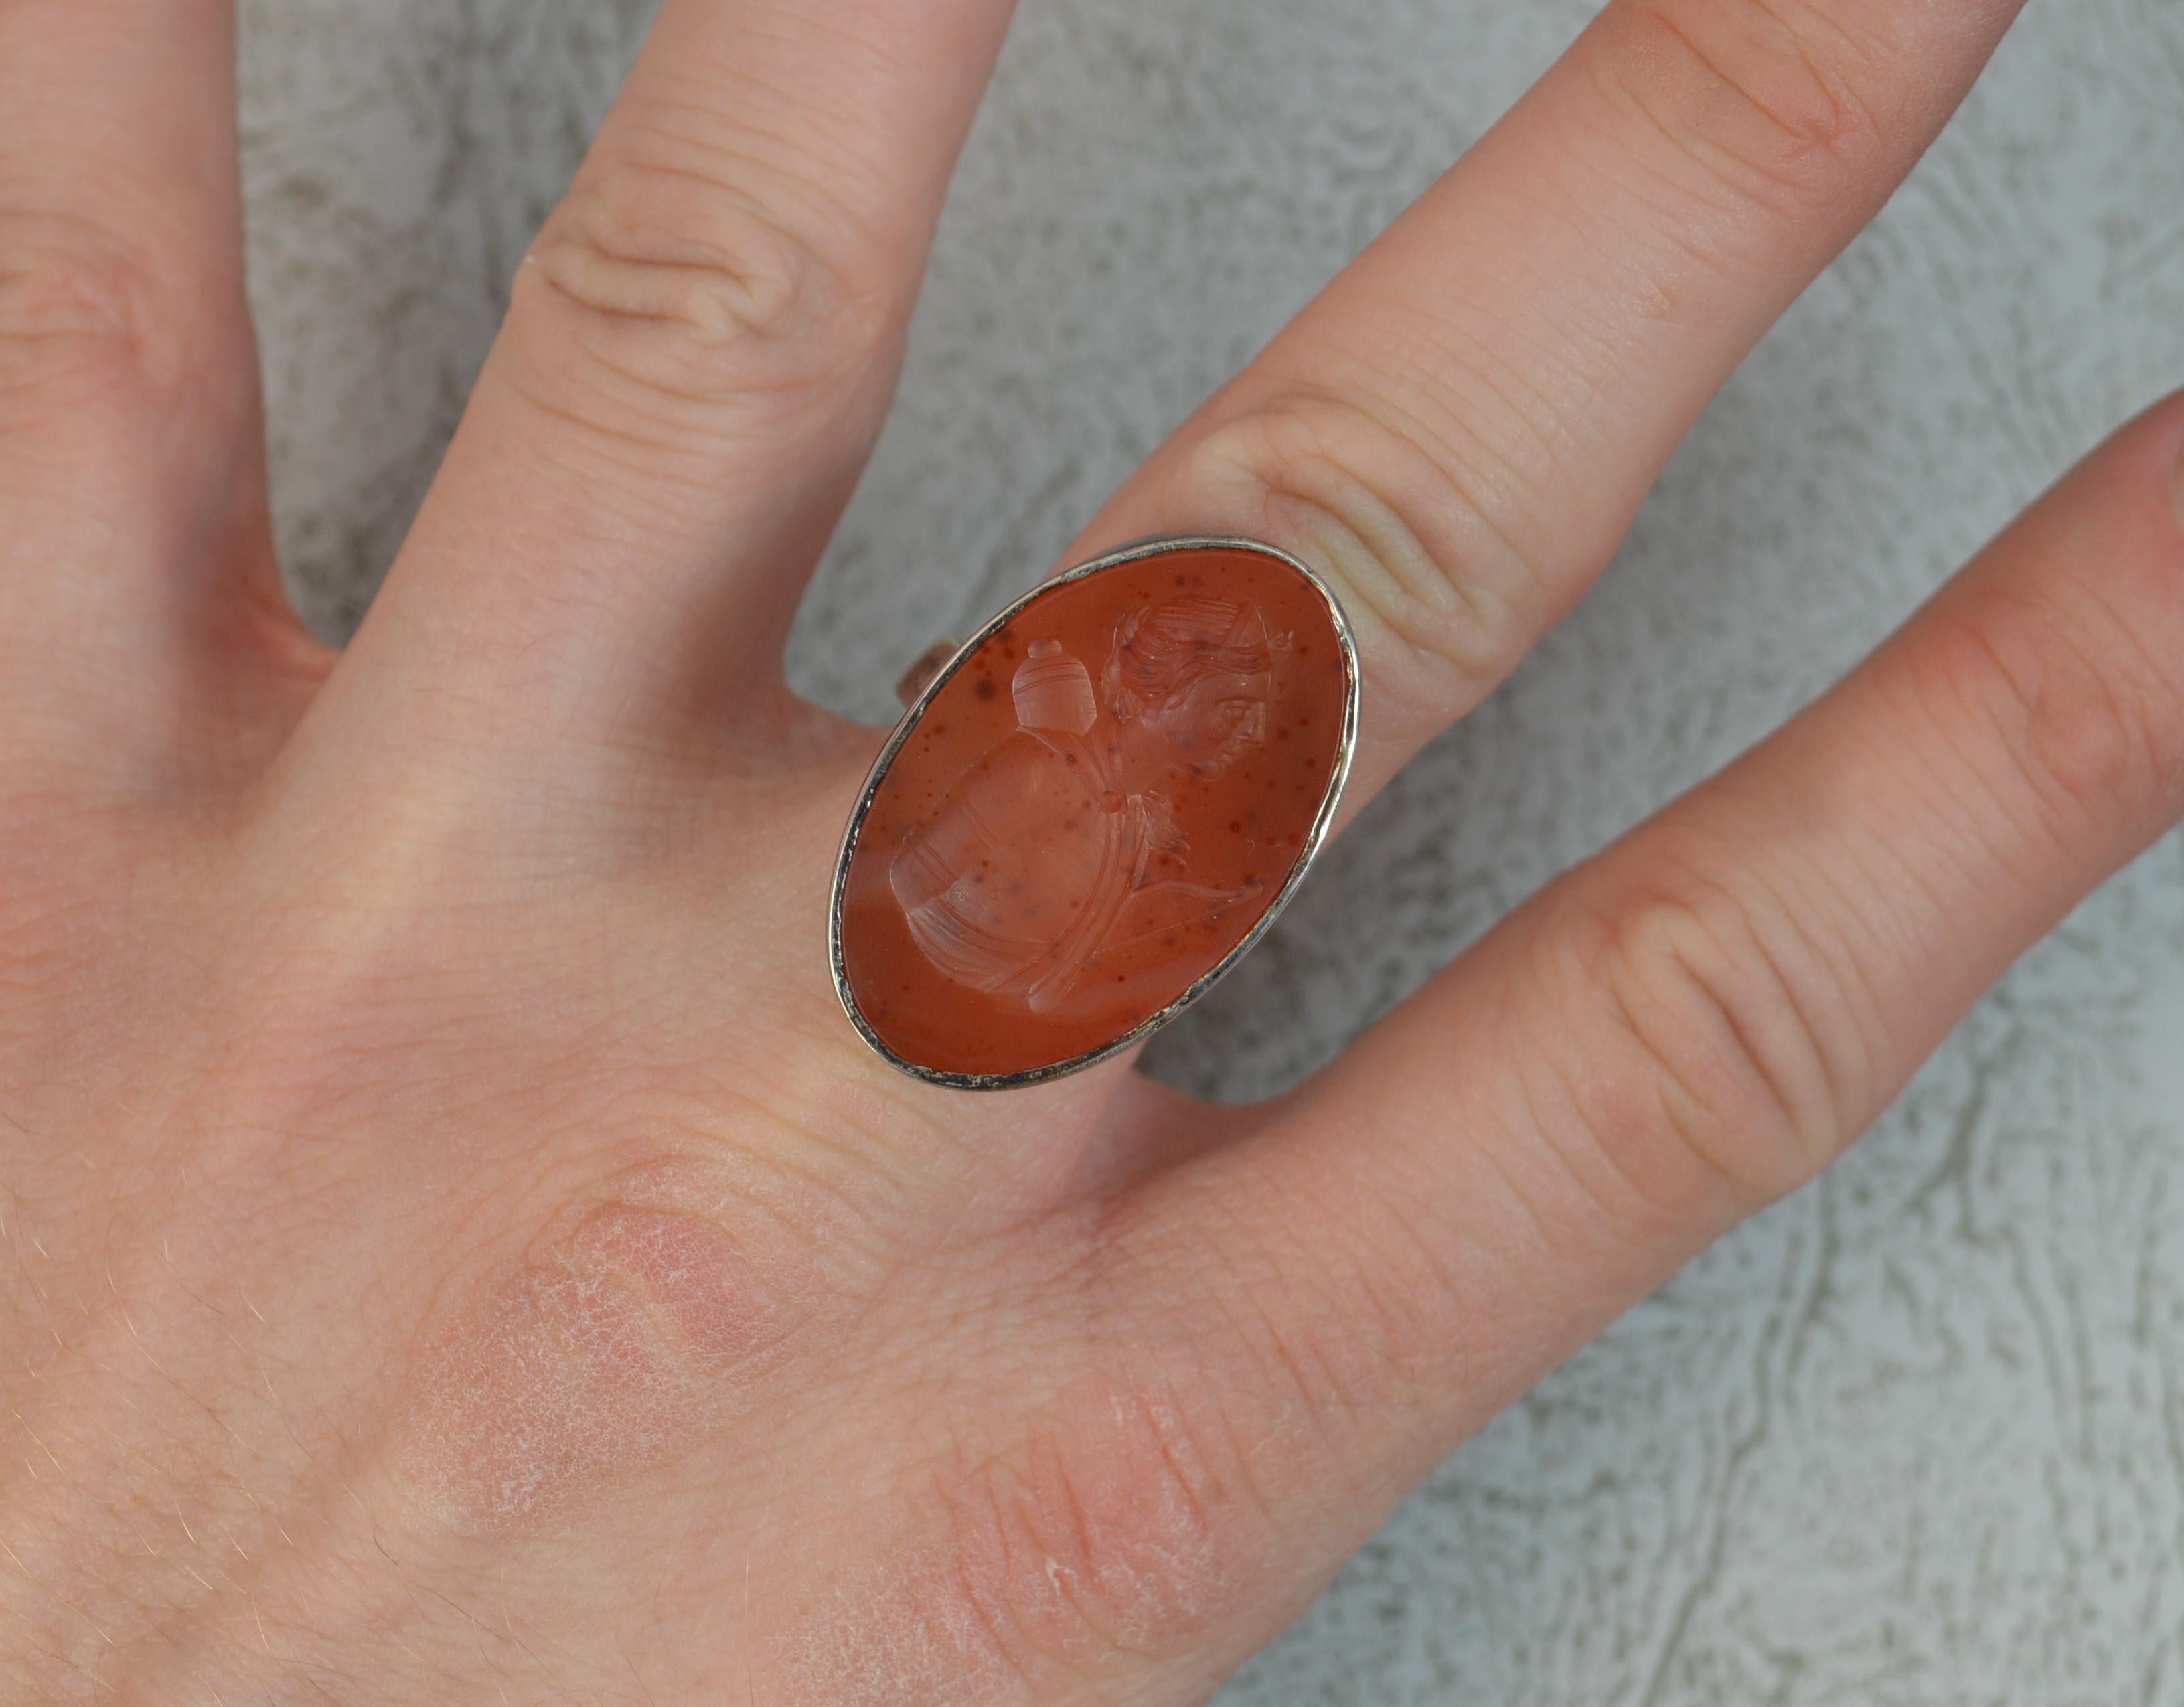 An impressive antique seal signet ring.
Sterling silver example. 
Closed bezel set carnelian agate. Finely engraved with the bust of a female archer.
Georgian or early Victorian intaglio reset circa 1900.
18mm x 29mm stone.
Hallmarks ; none, tests